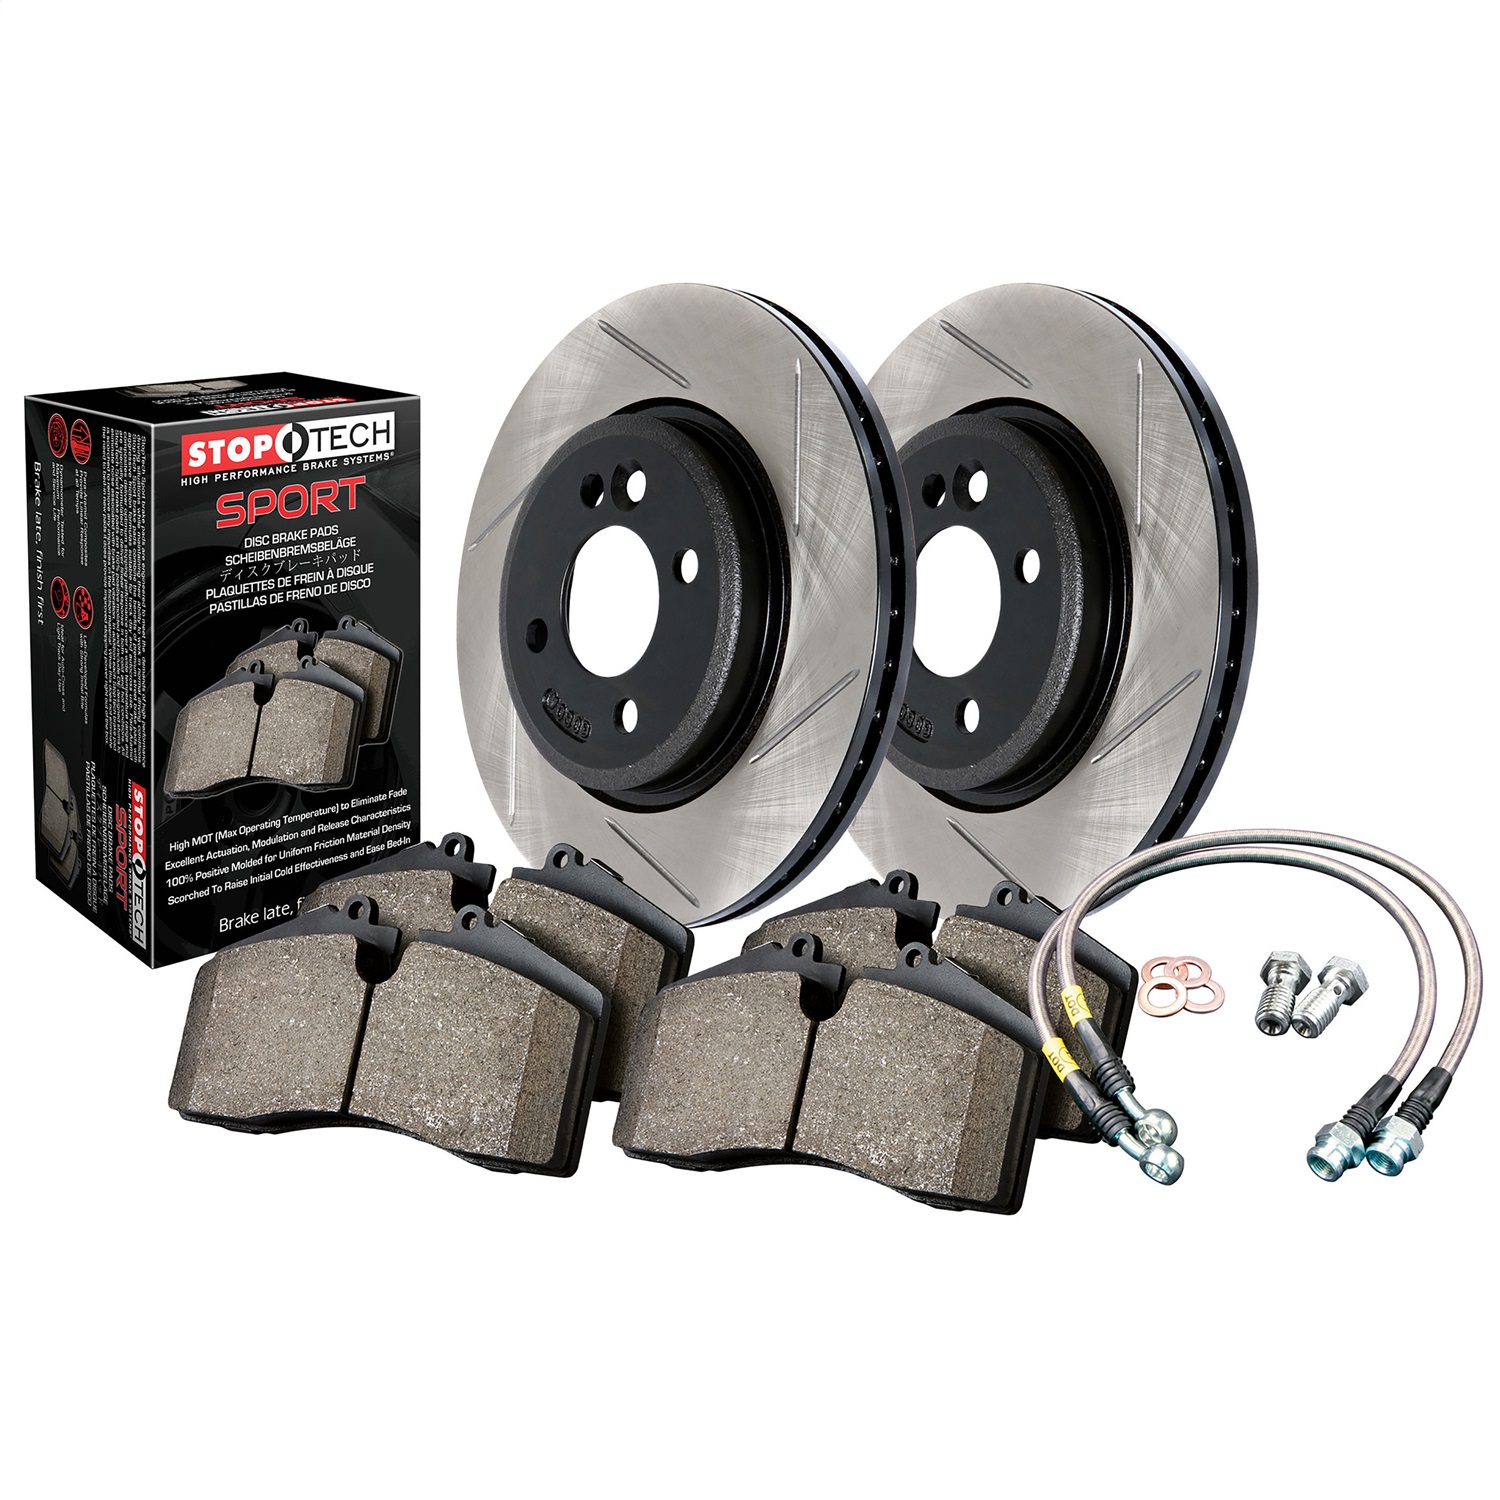 StopTech 977.33039R Sport Disc Brake Kit w/Slotted Rotors